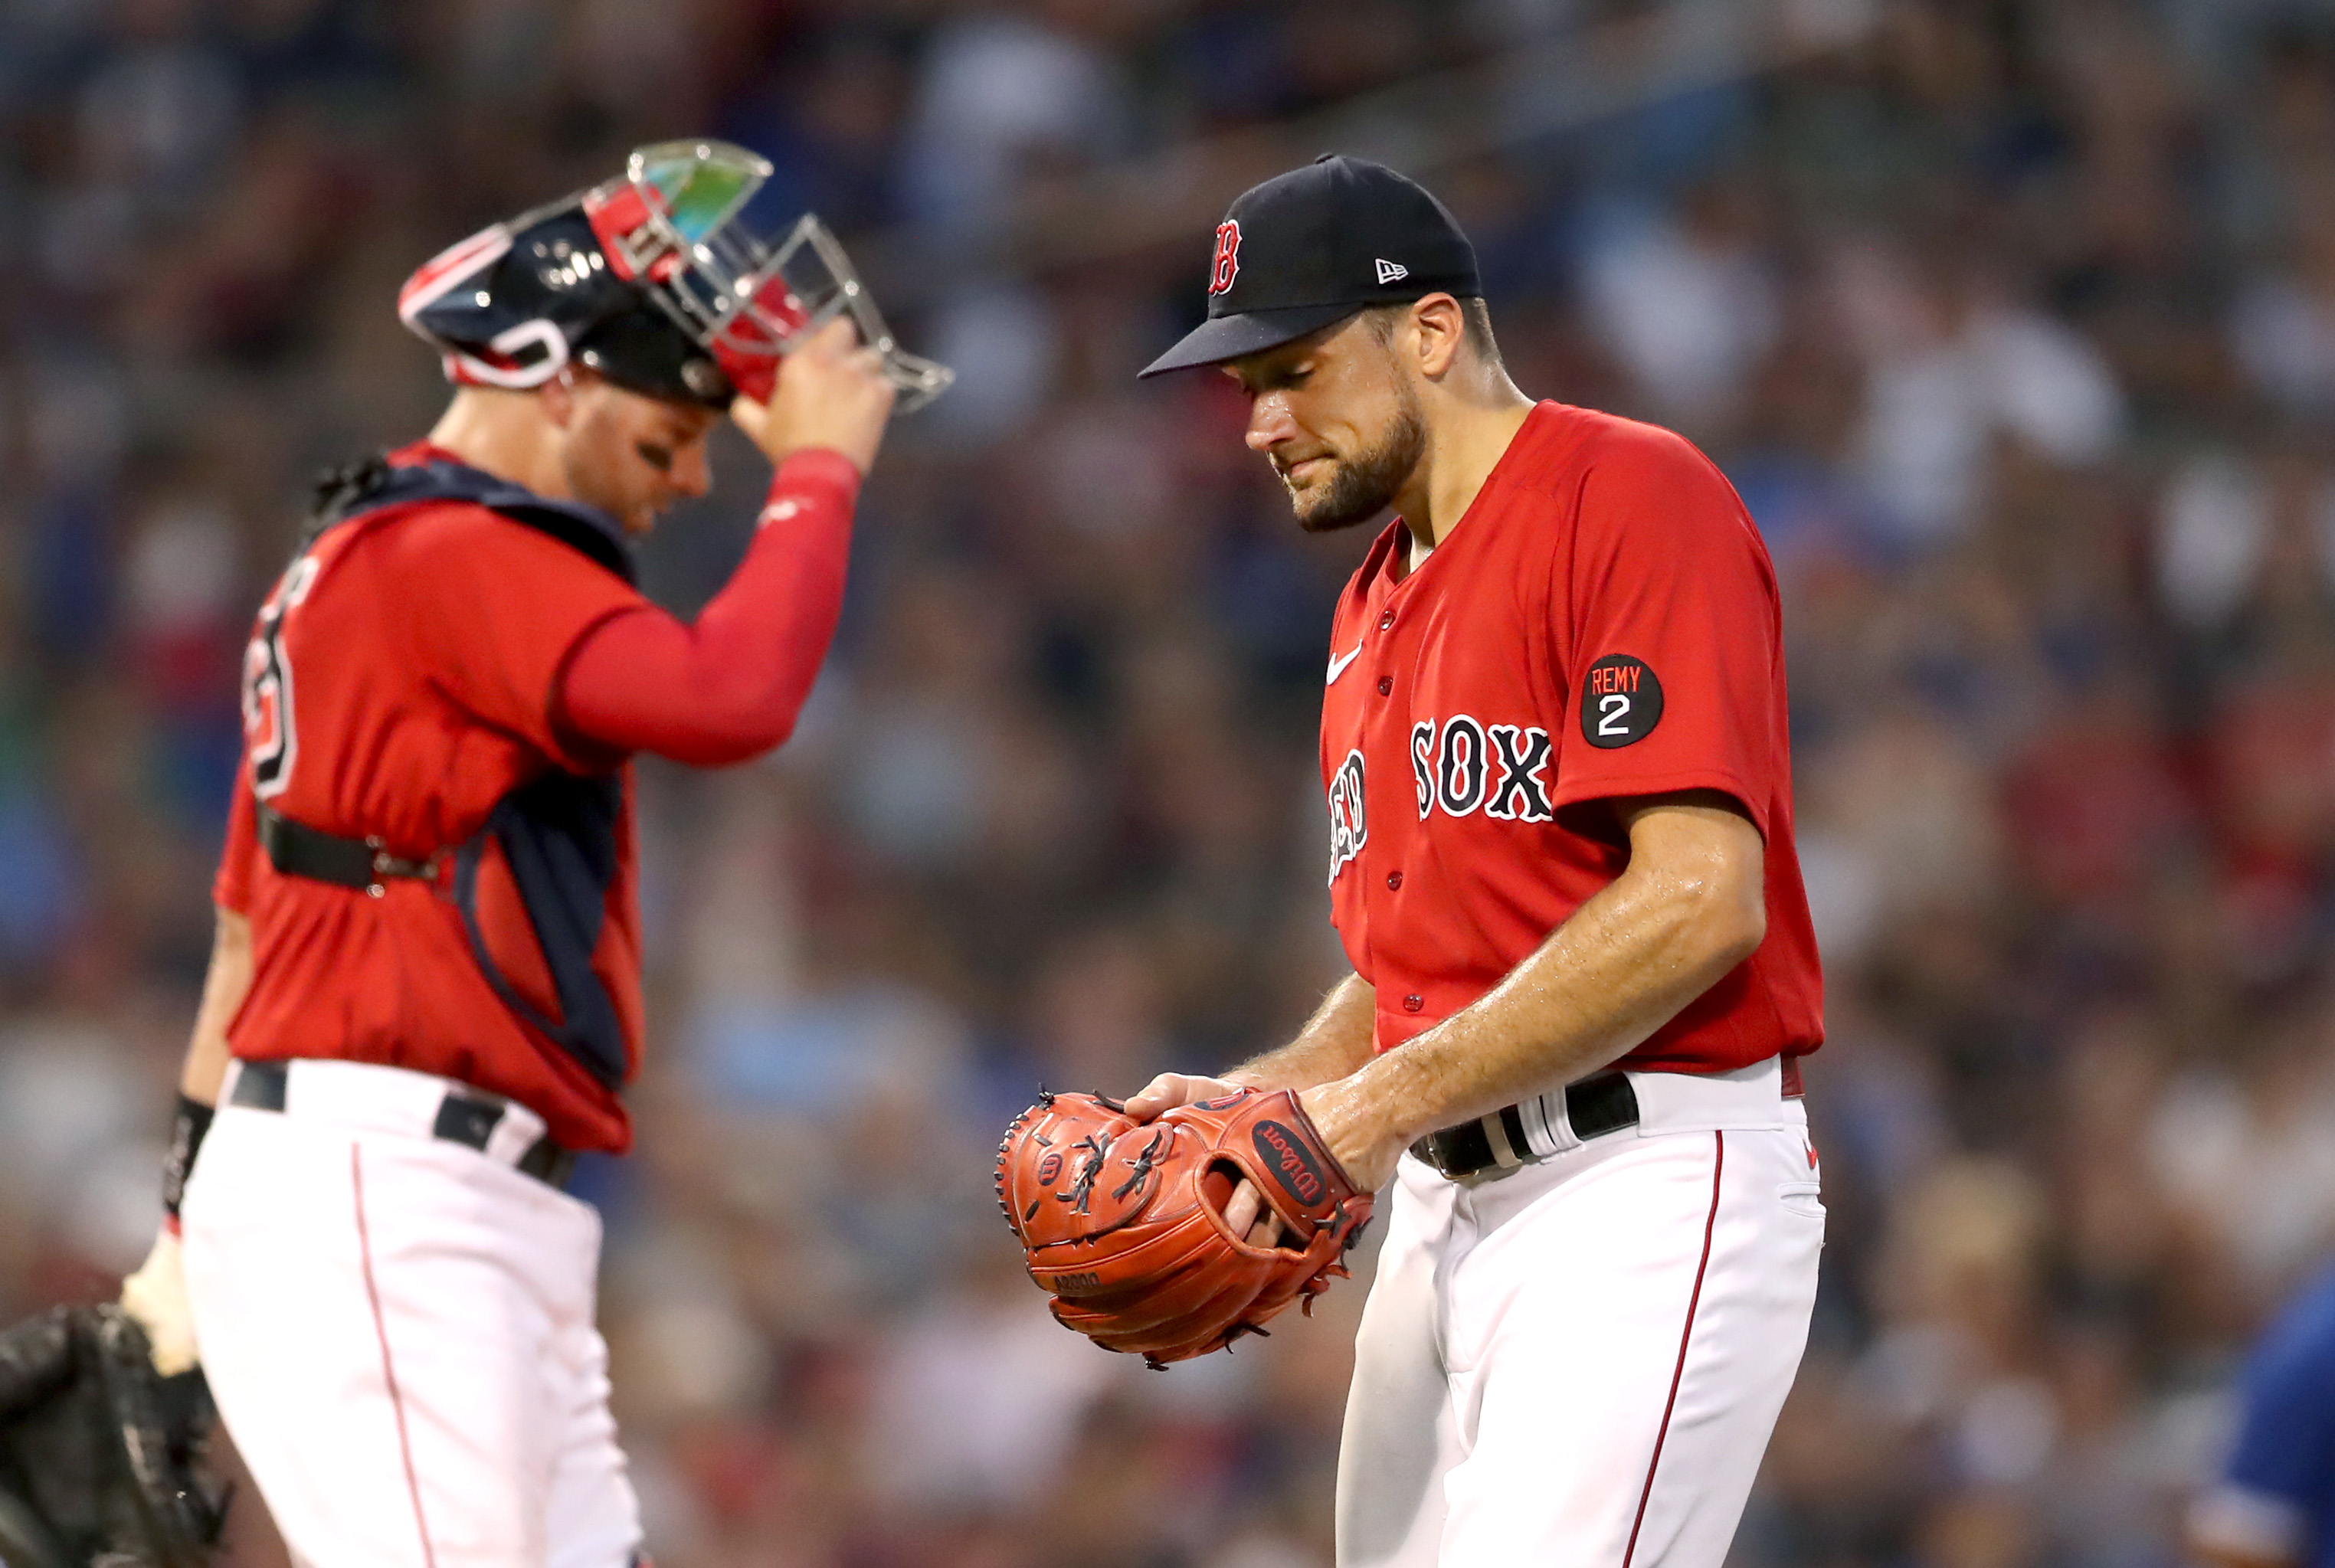 Red Sox hit season-high 5 home runs in rout of Orioles – Hartford